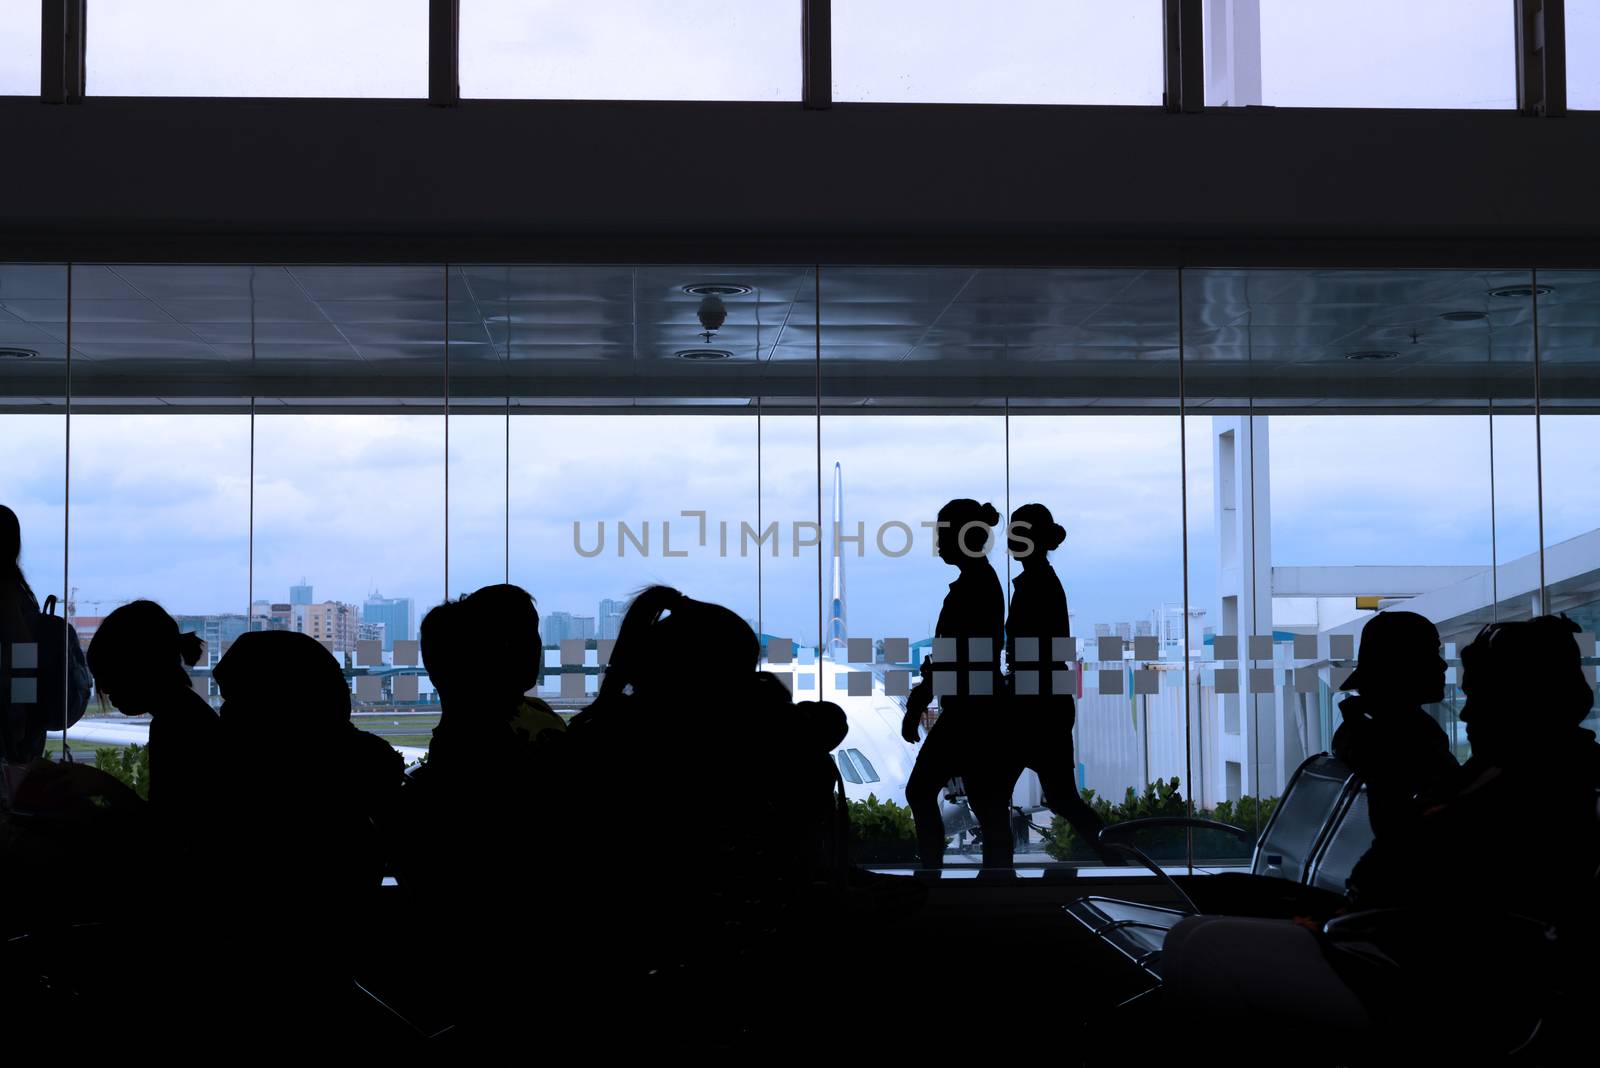 silhouette of crew and passengers at an airport lounge